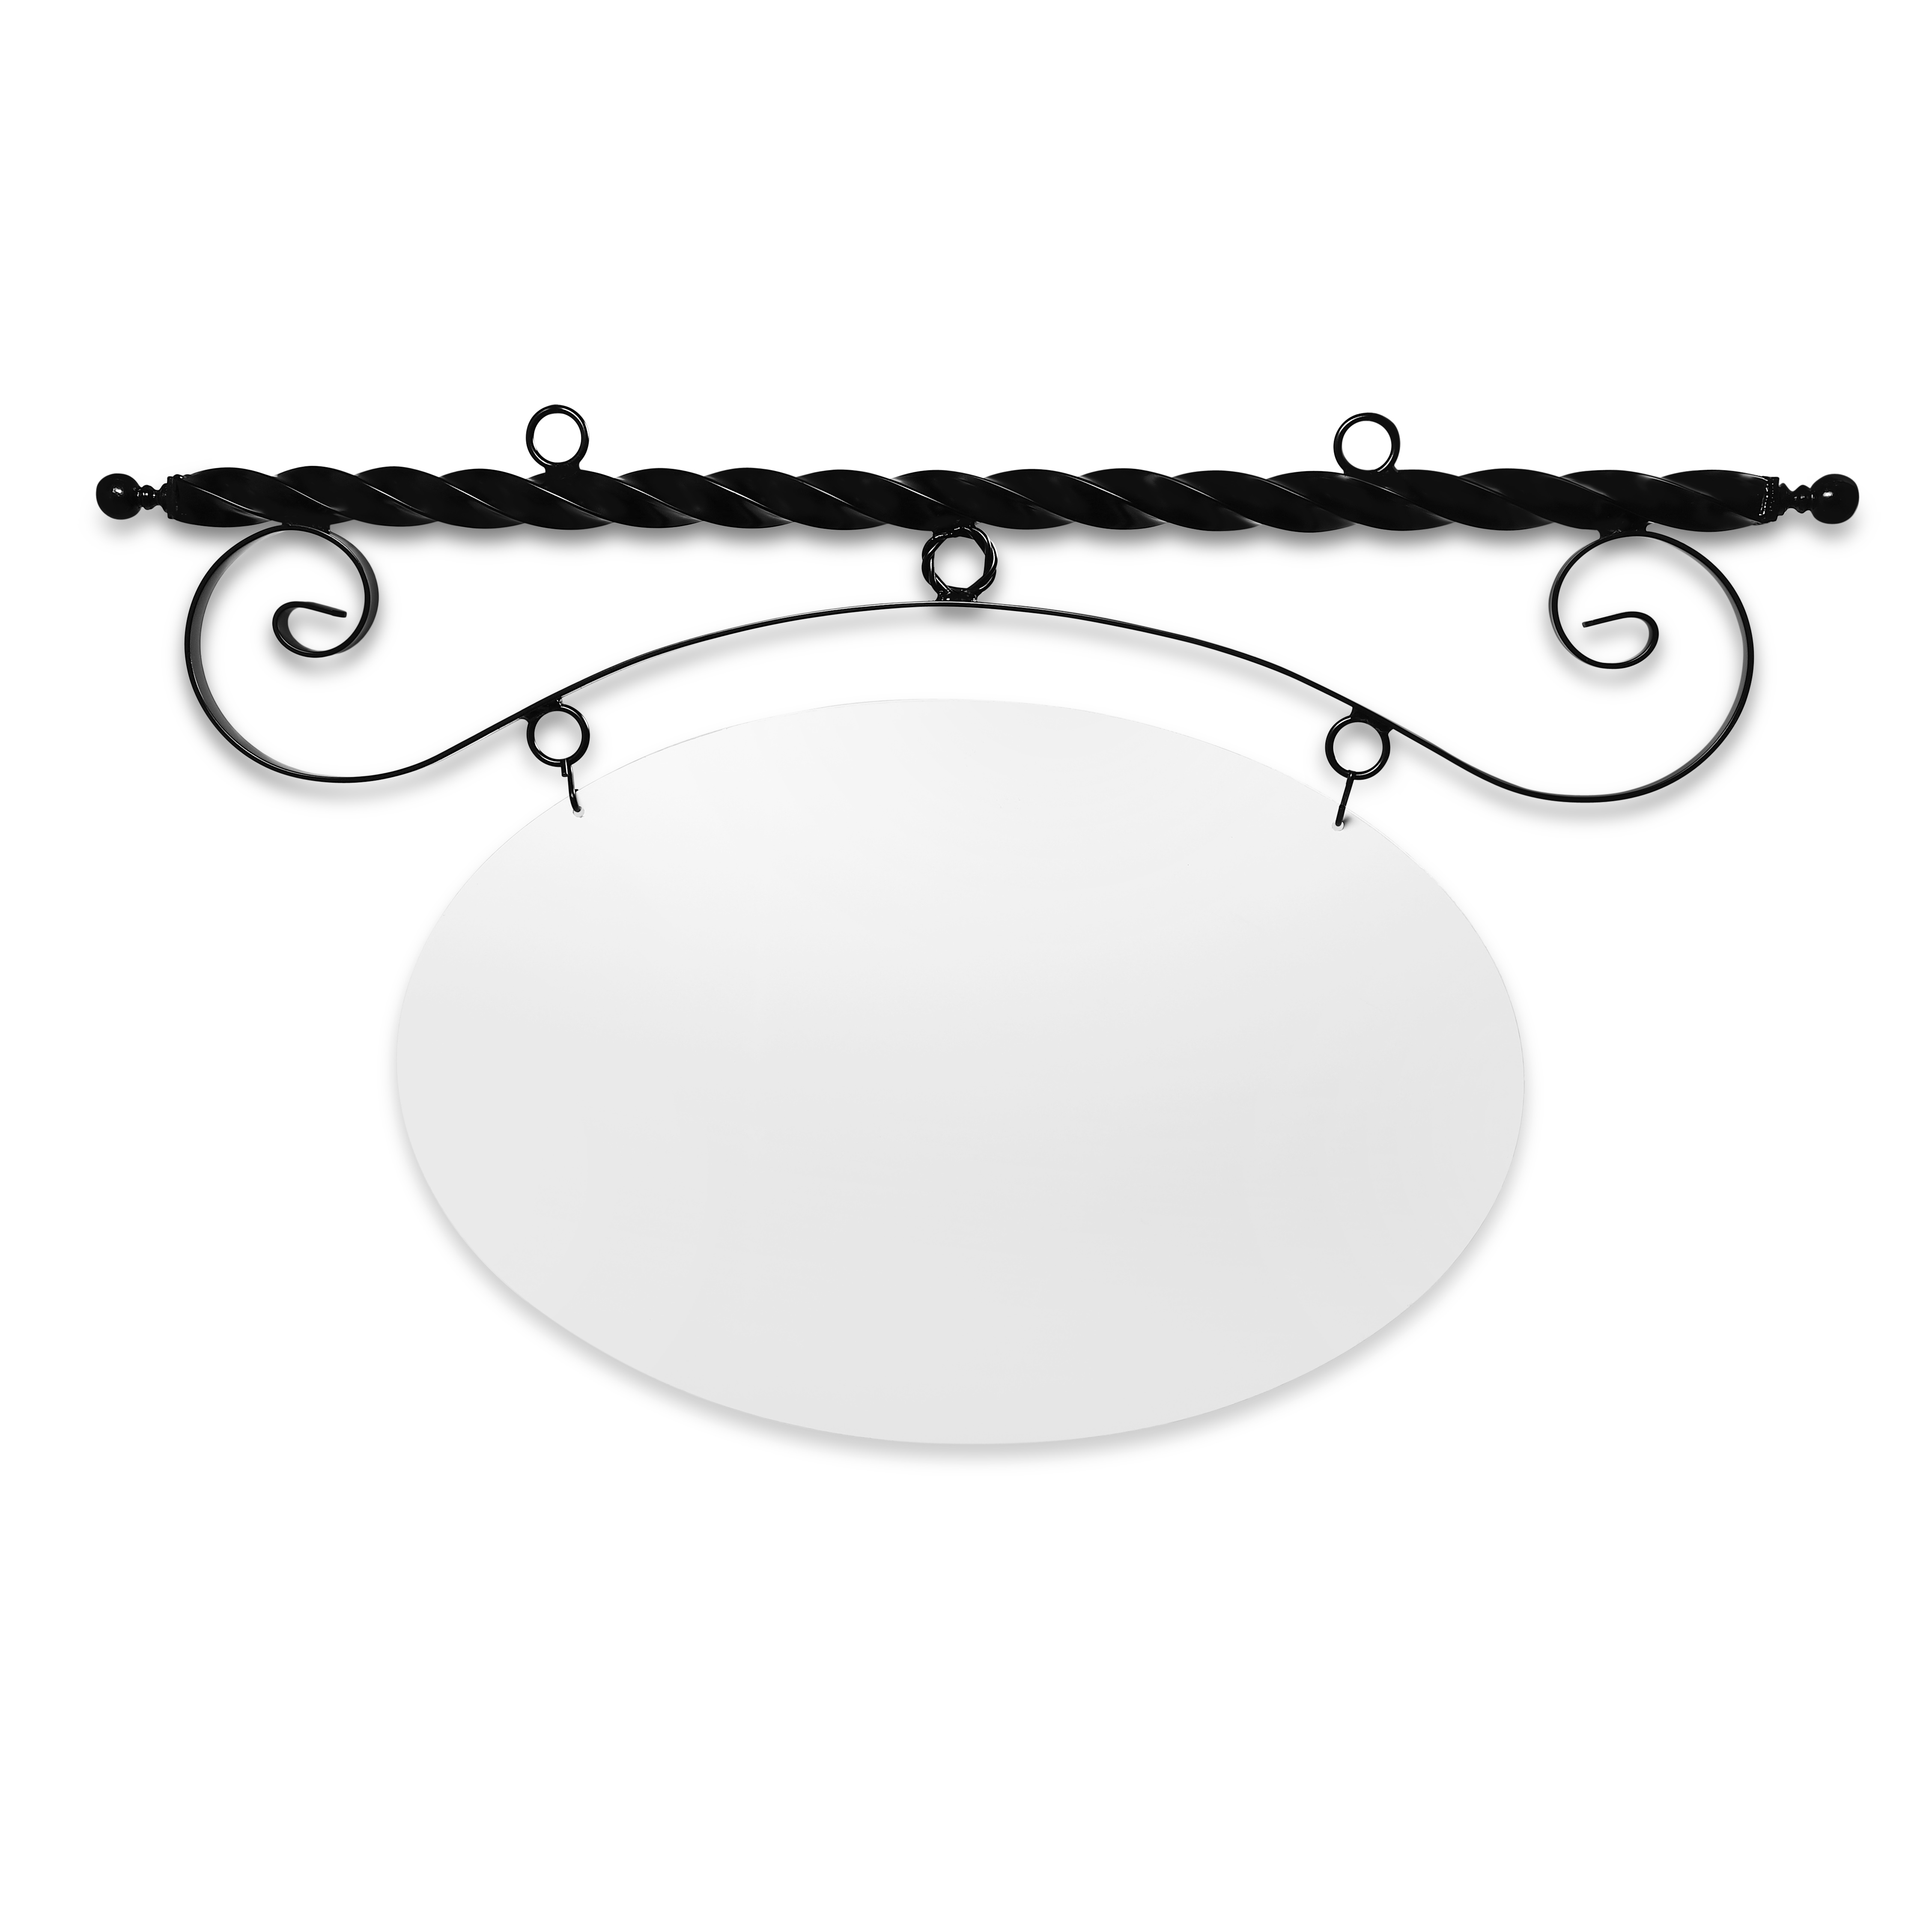 43'' Wide Ceiling Mount Bracket in  Black Powder Coated Steel with 22'' Tall X 33'' Wide X .080'' Thick White Aluminum Sign Blank and 2 Black Powder Coated S-Hooks (Ball Finial)